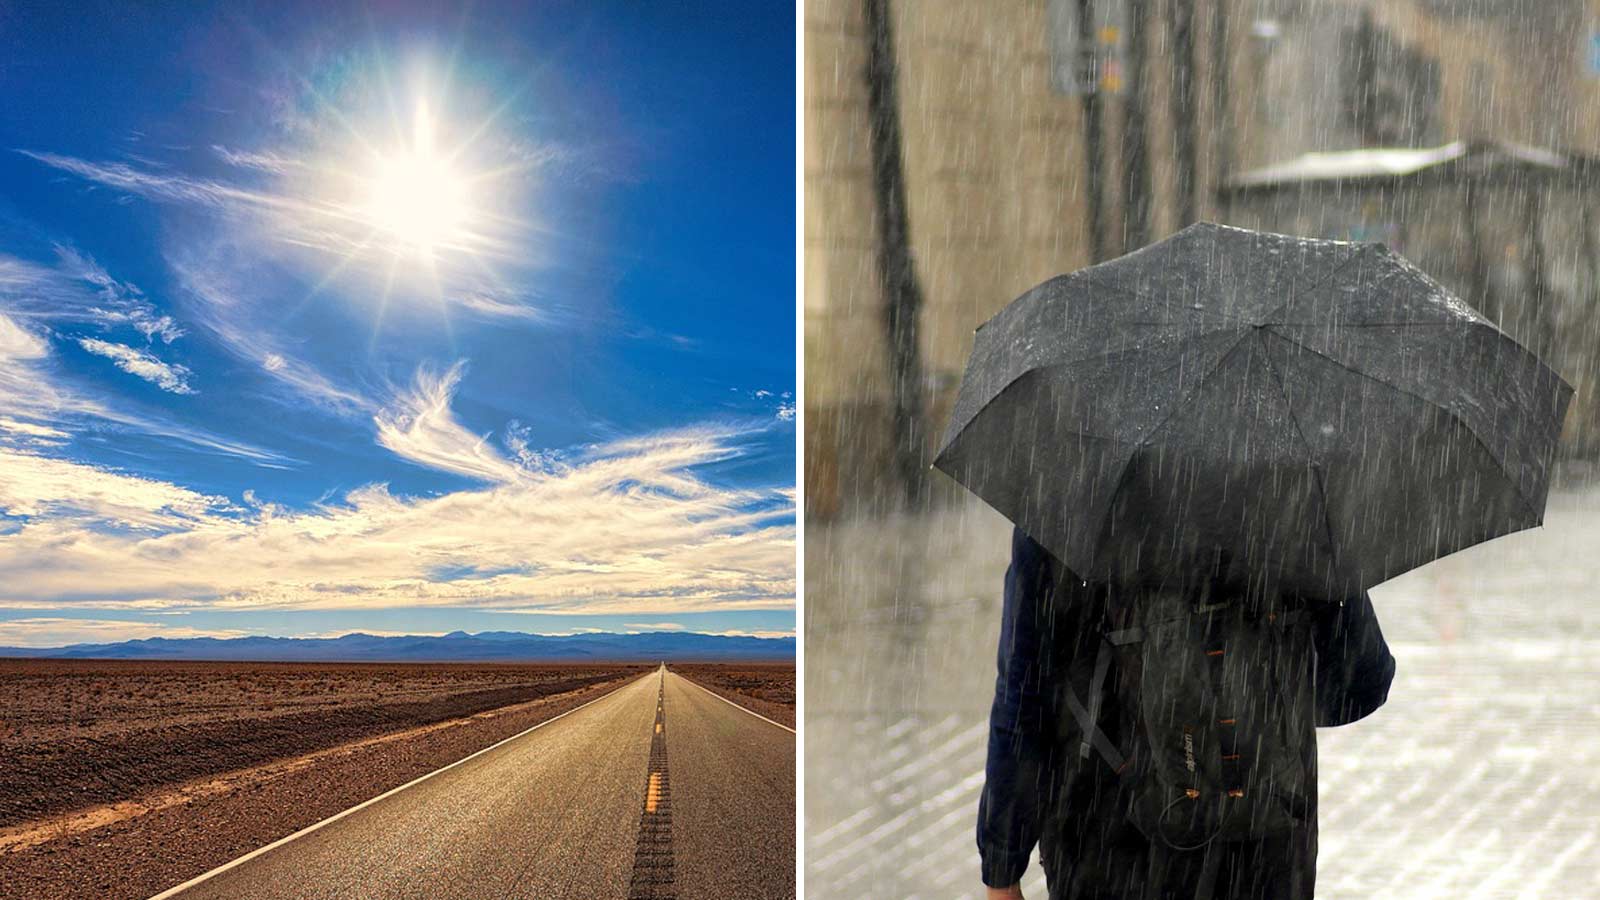 Split image, with one side showing sunny skies and the other a man holding an umbrella in the rain...